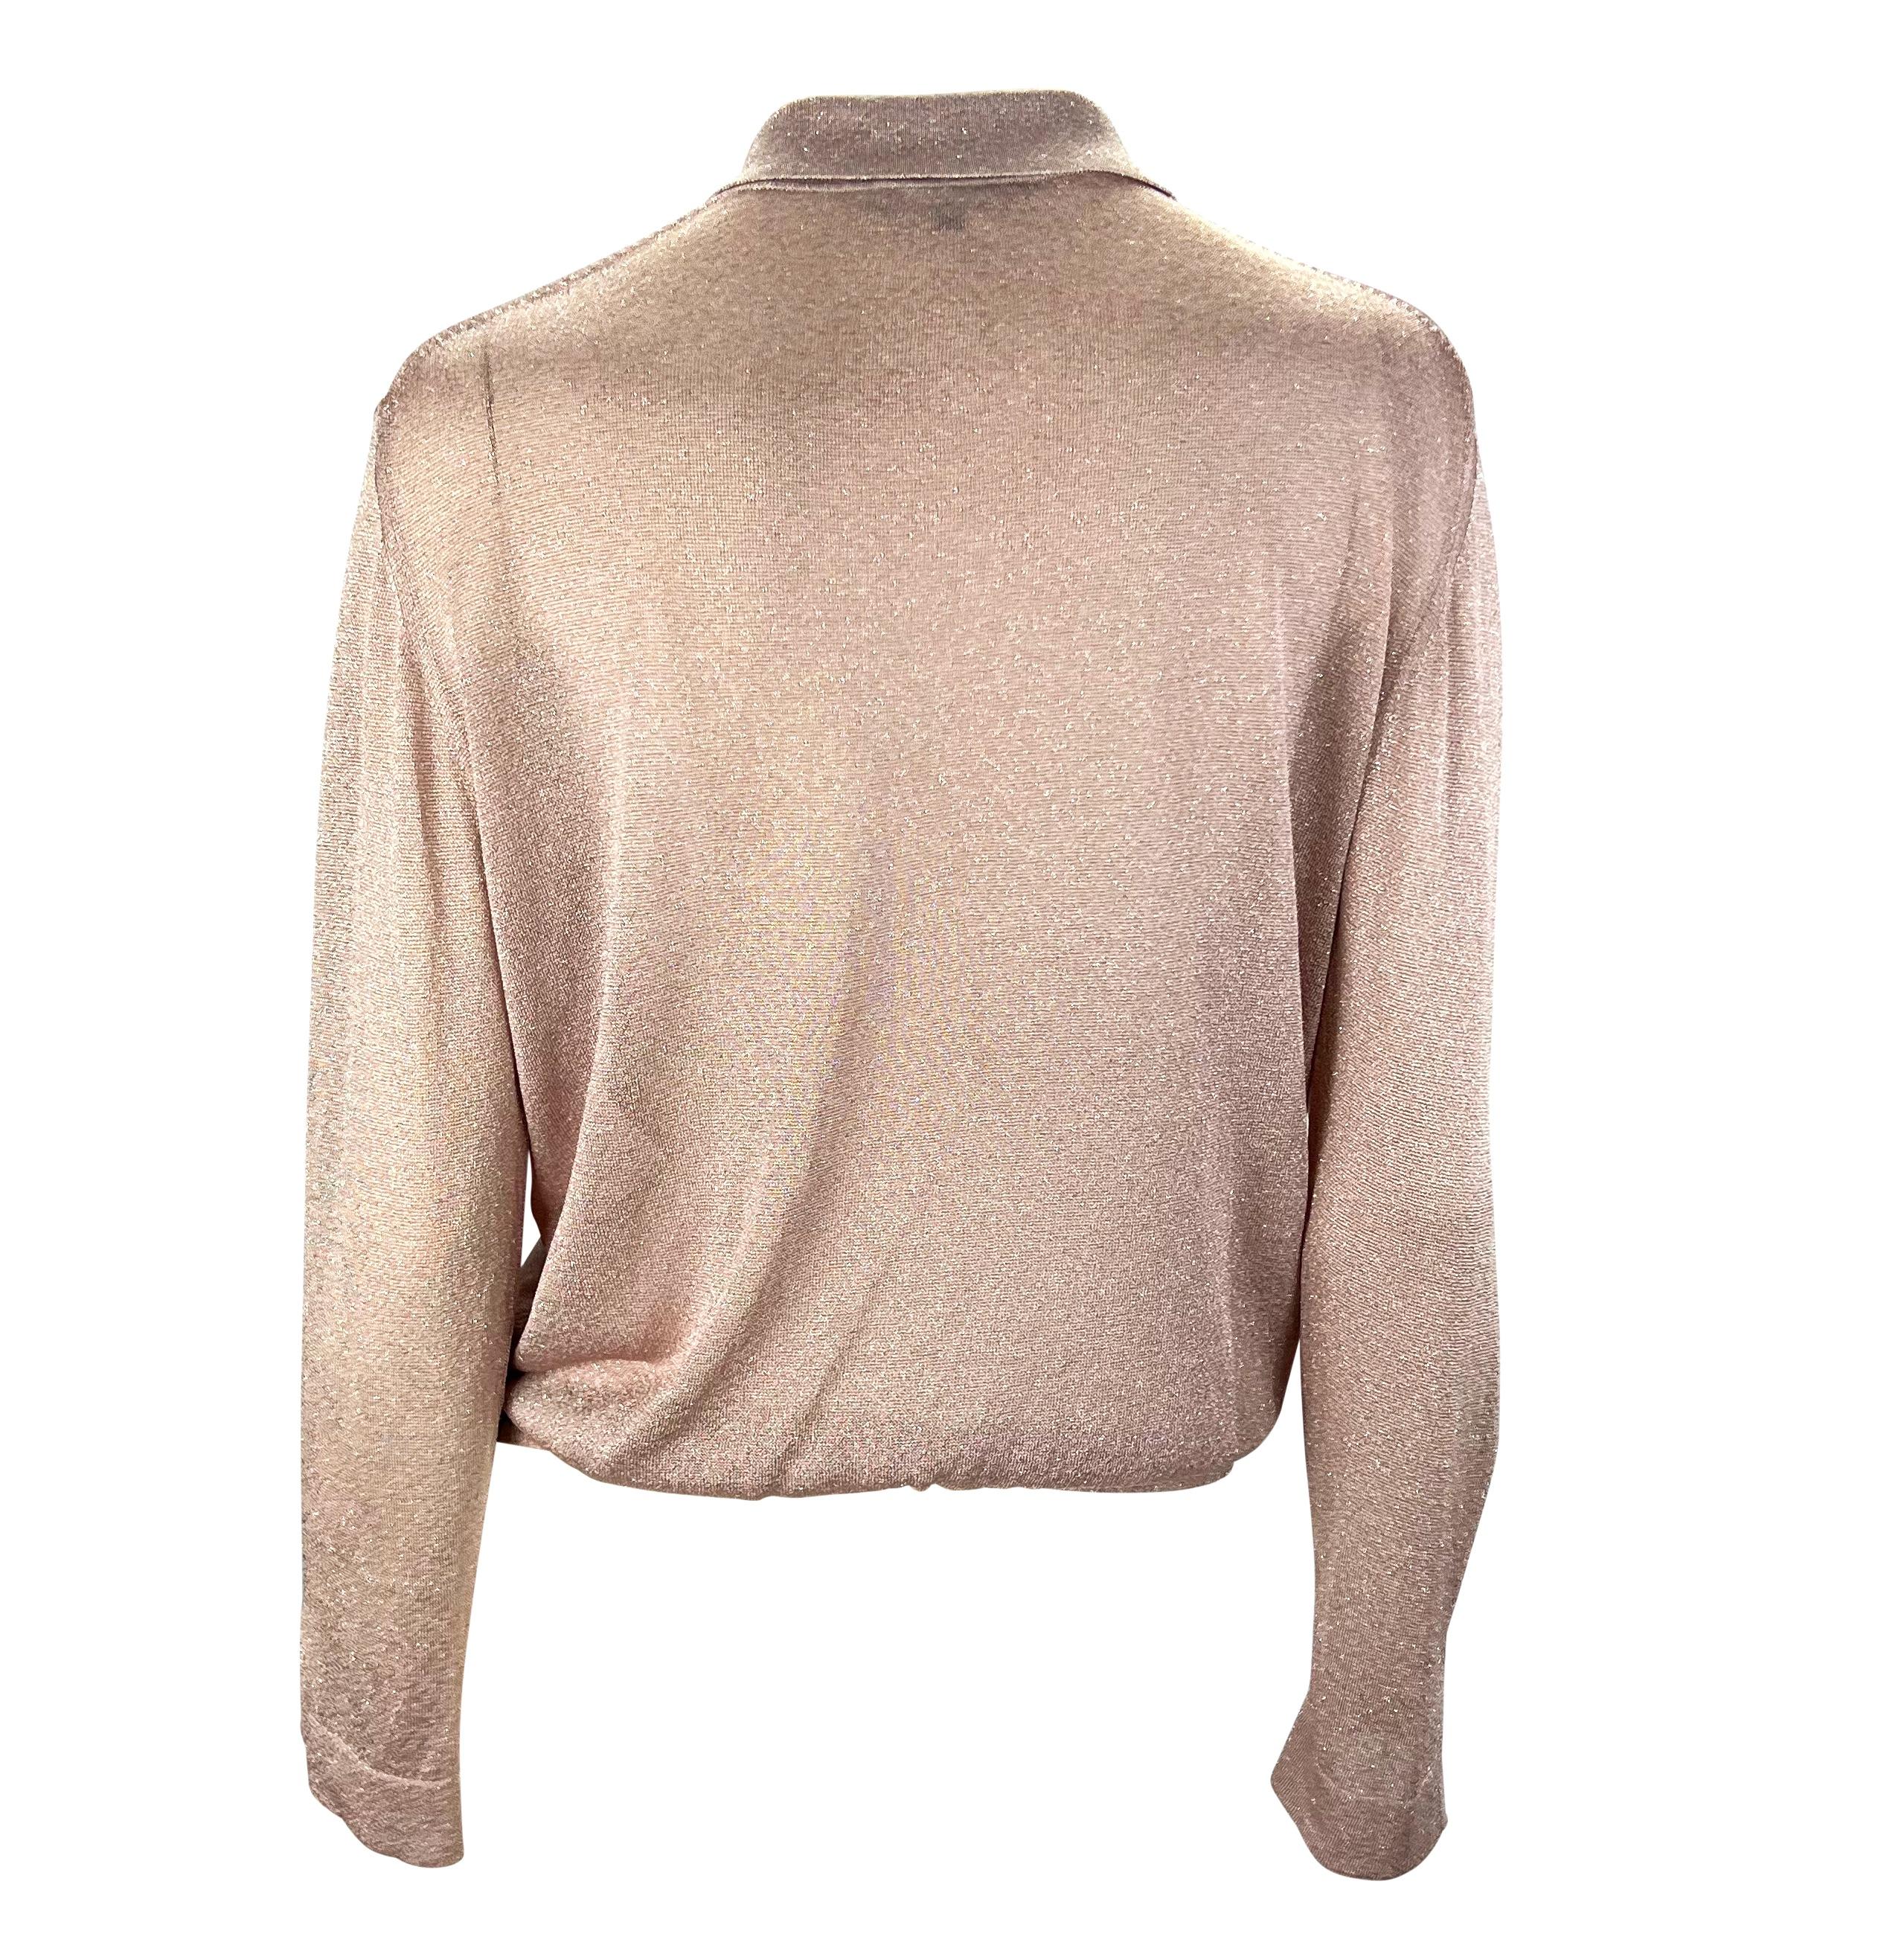 S/S 2000 Gucci by Tom Ford Runway Sheer Blush Pink Lurex Knit Belted Top In Good Condition For Sale In West Hollywood, CA